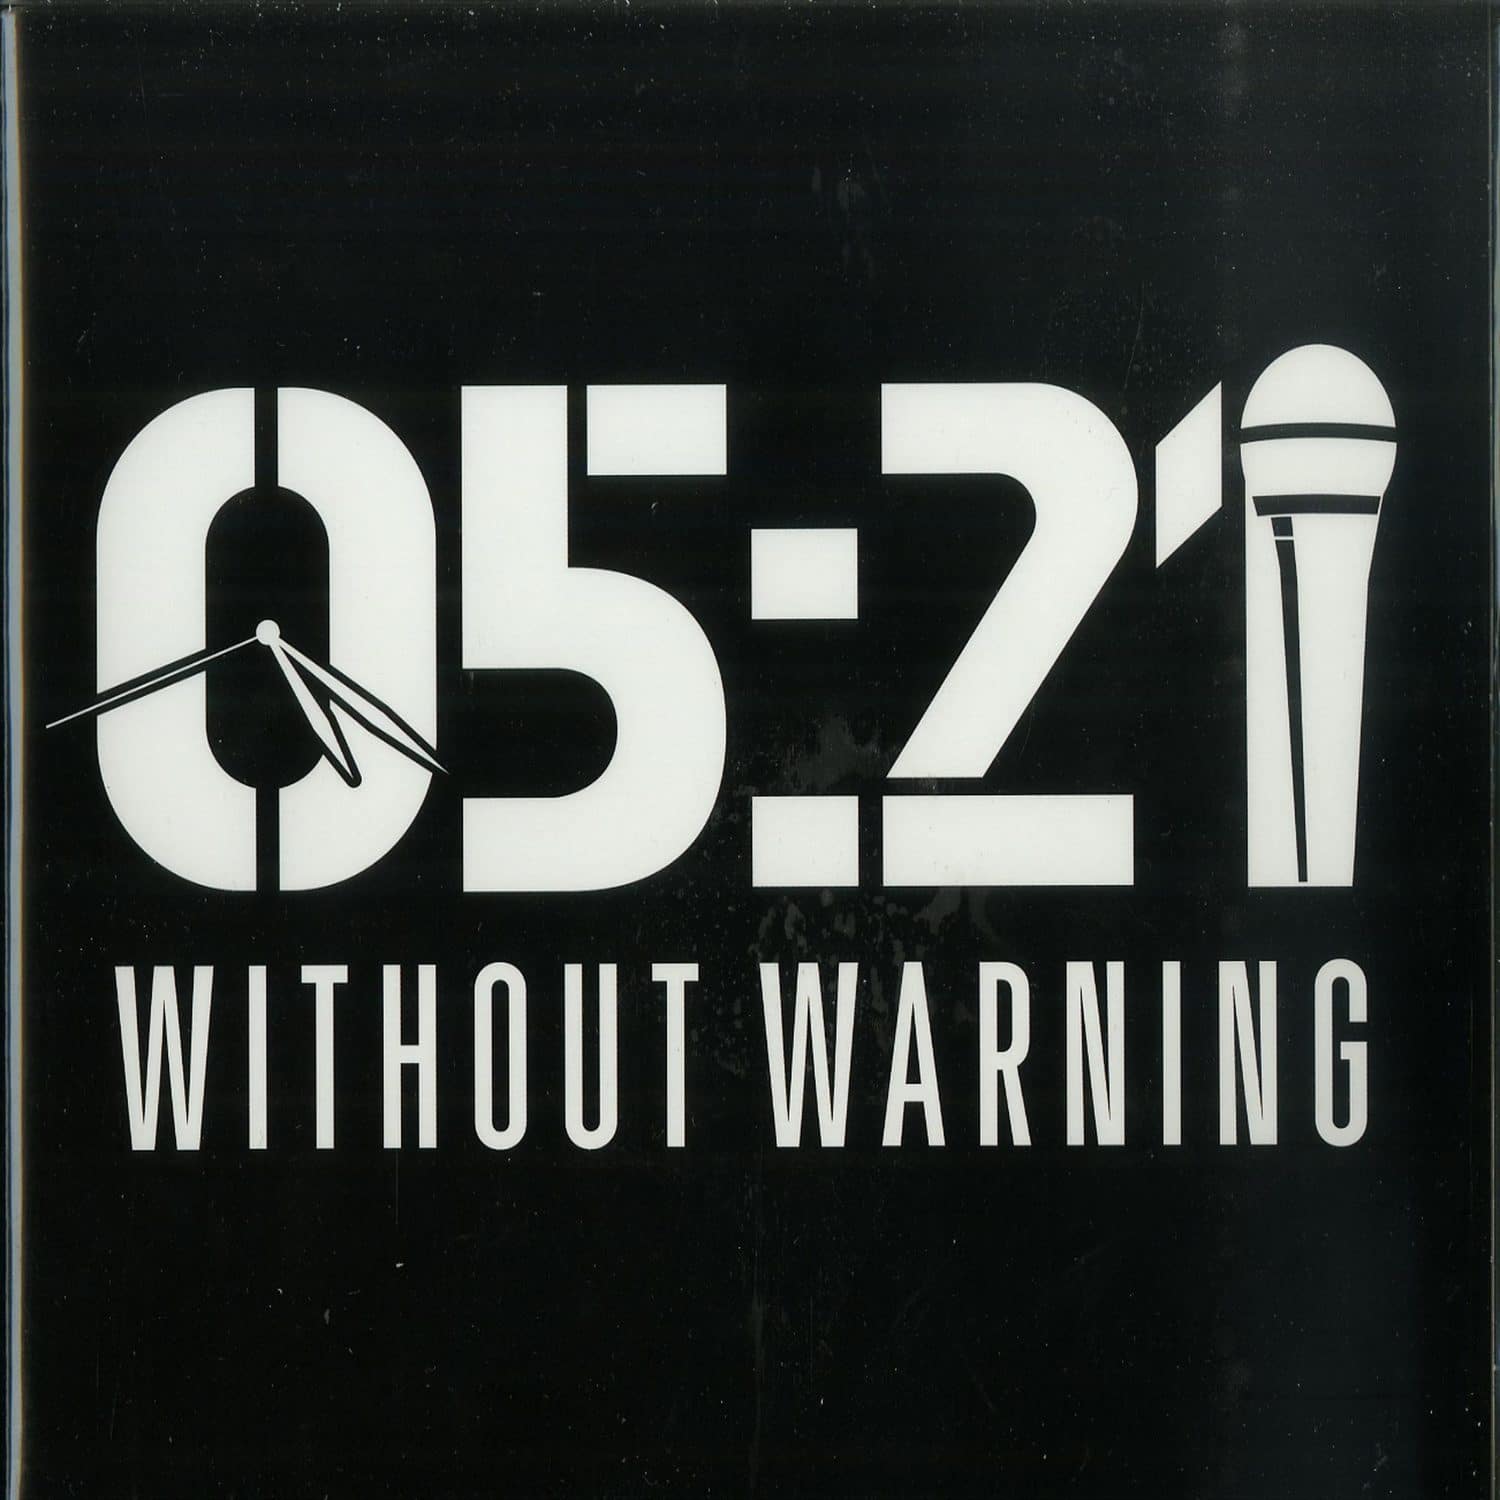 05:21 - WITHOUT WARNING 